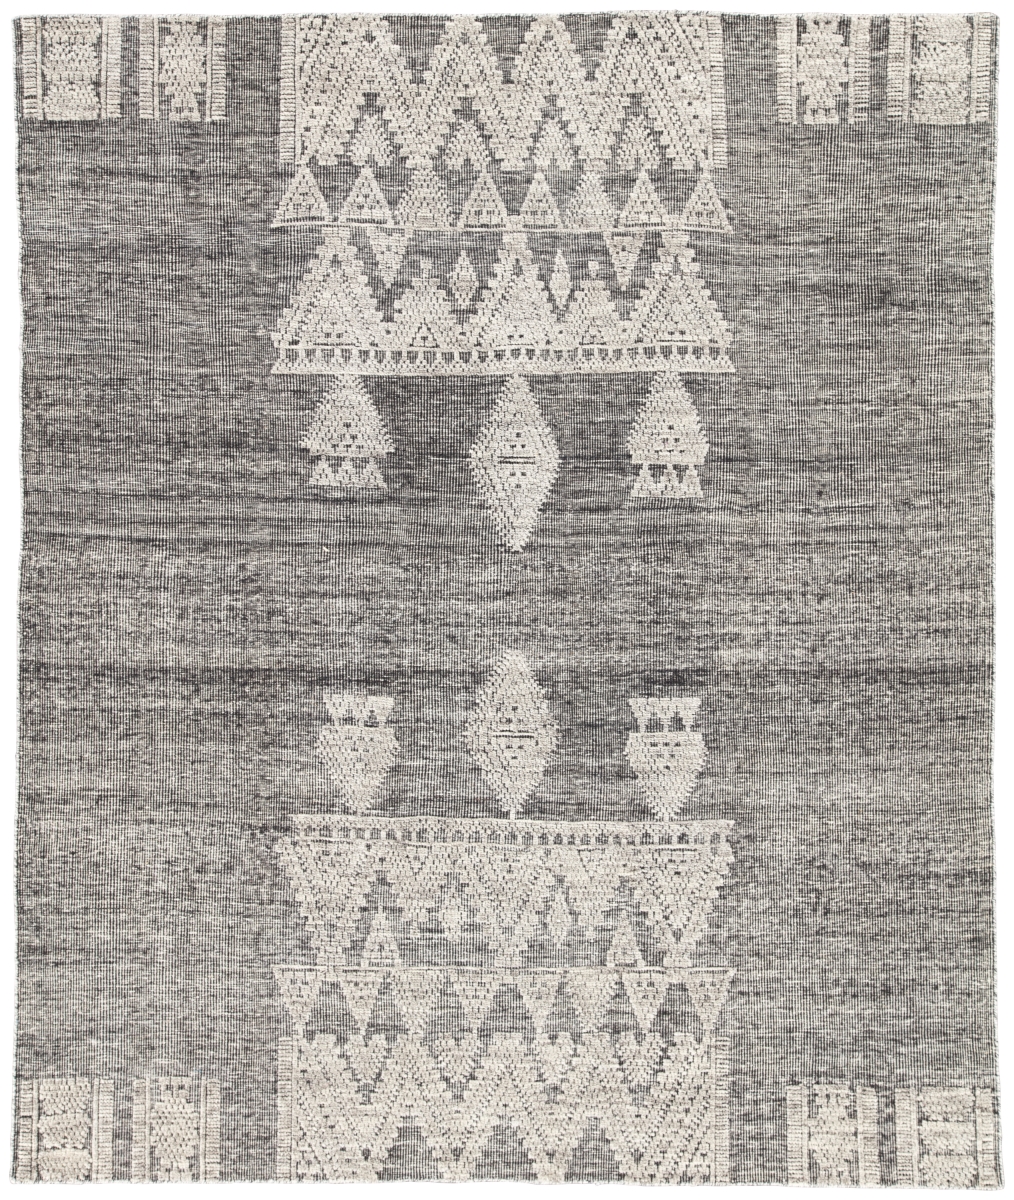 Rug136499 8 X 10 Ft. Rize Torsby Hand-knotted Geometric Black & Ivory Area Rug